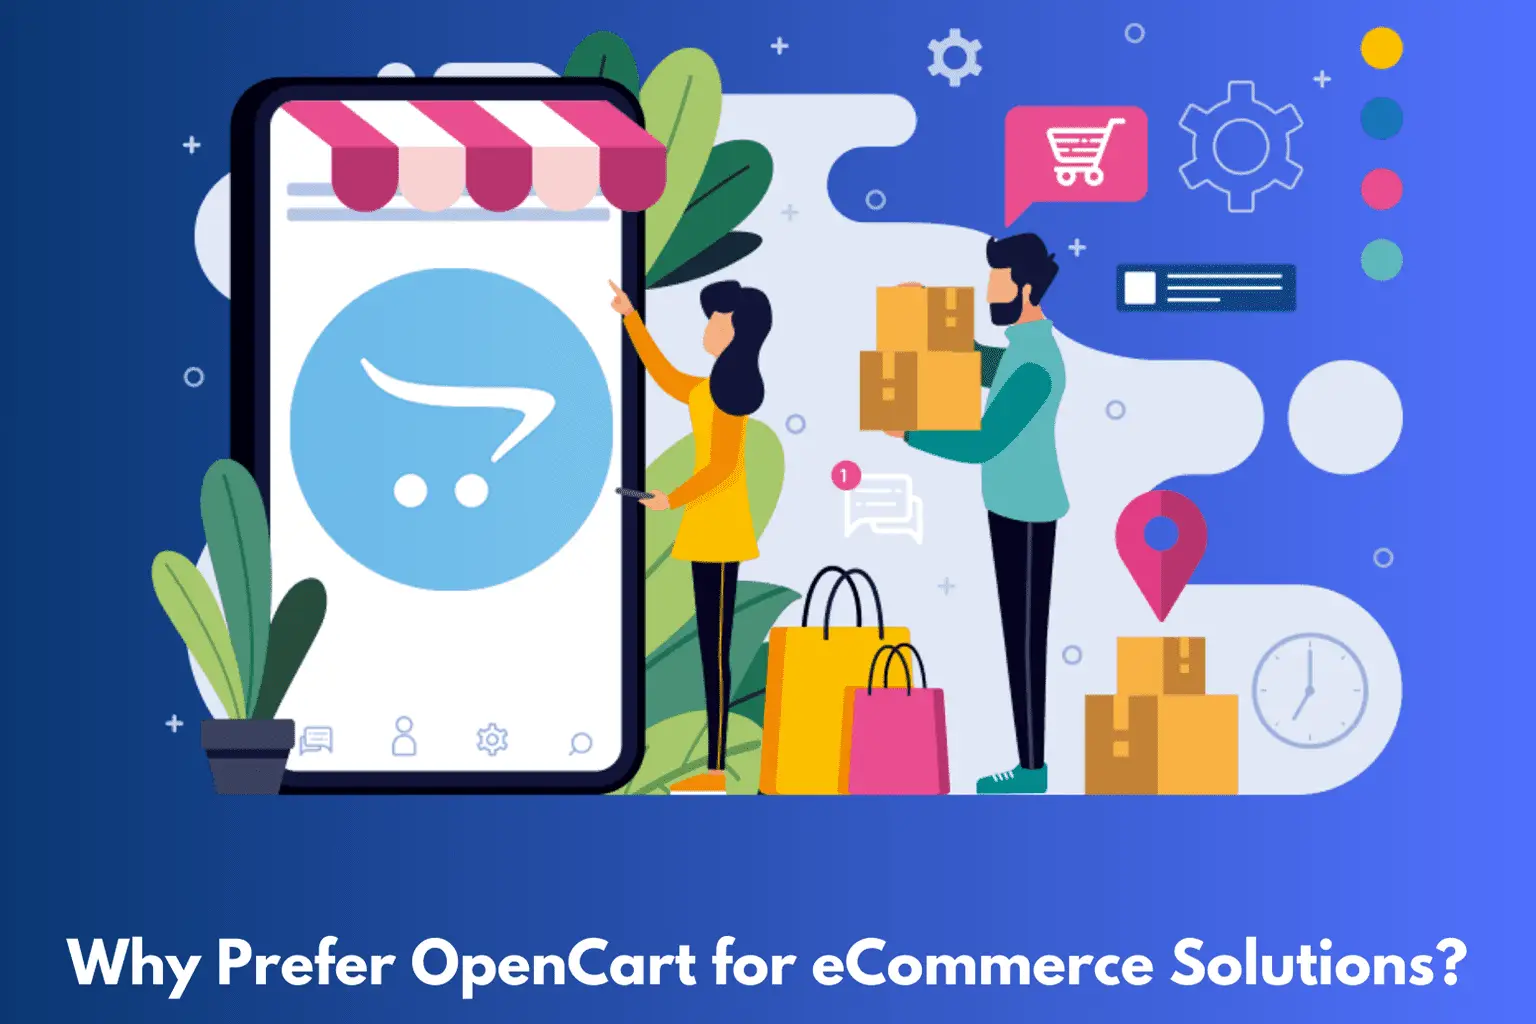 OpenCart for eCommerce Solutions